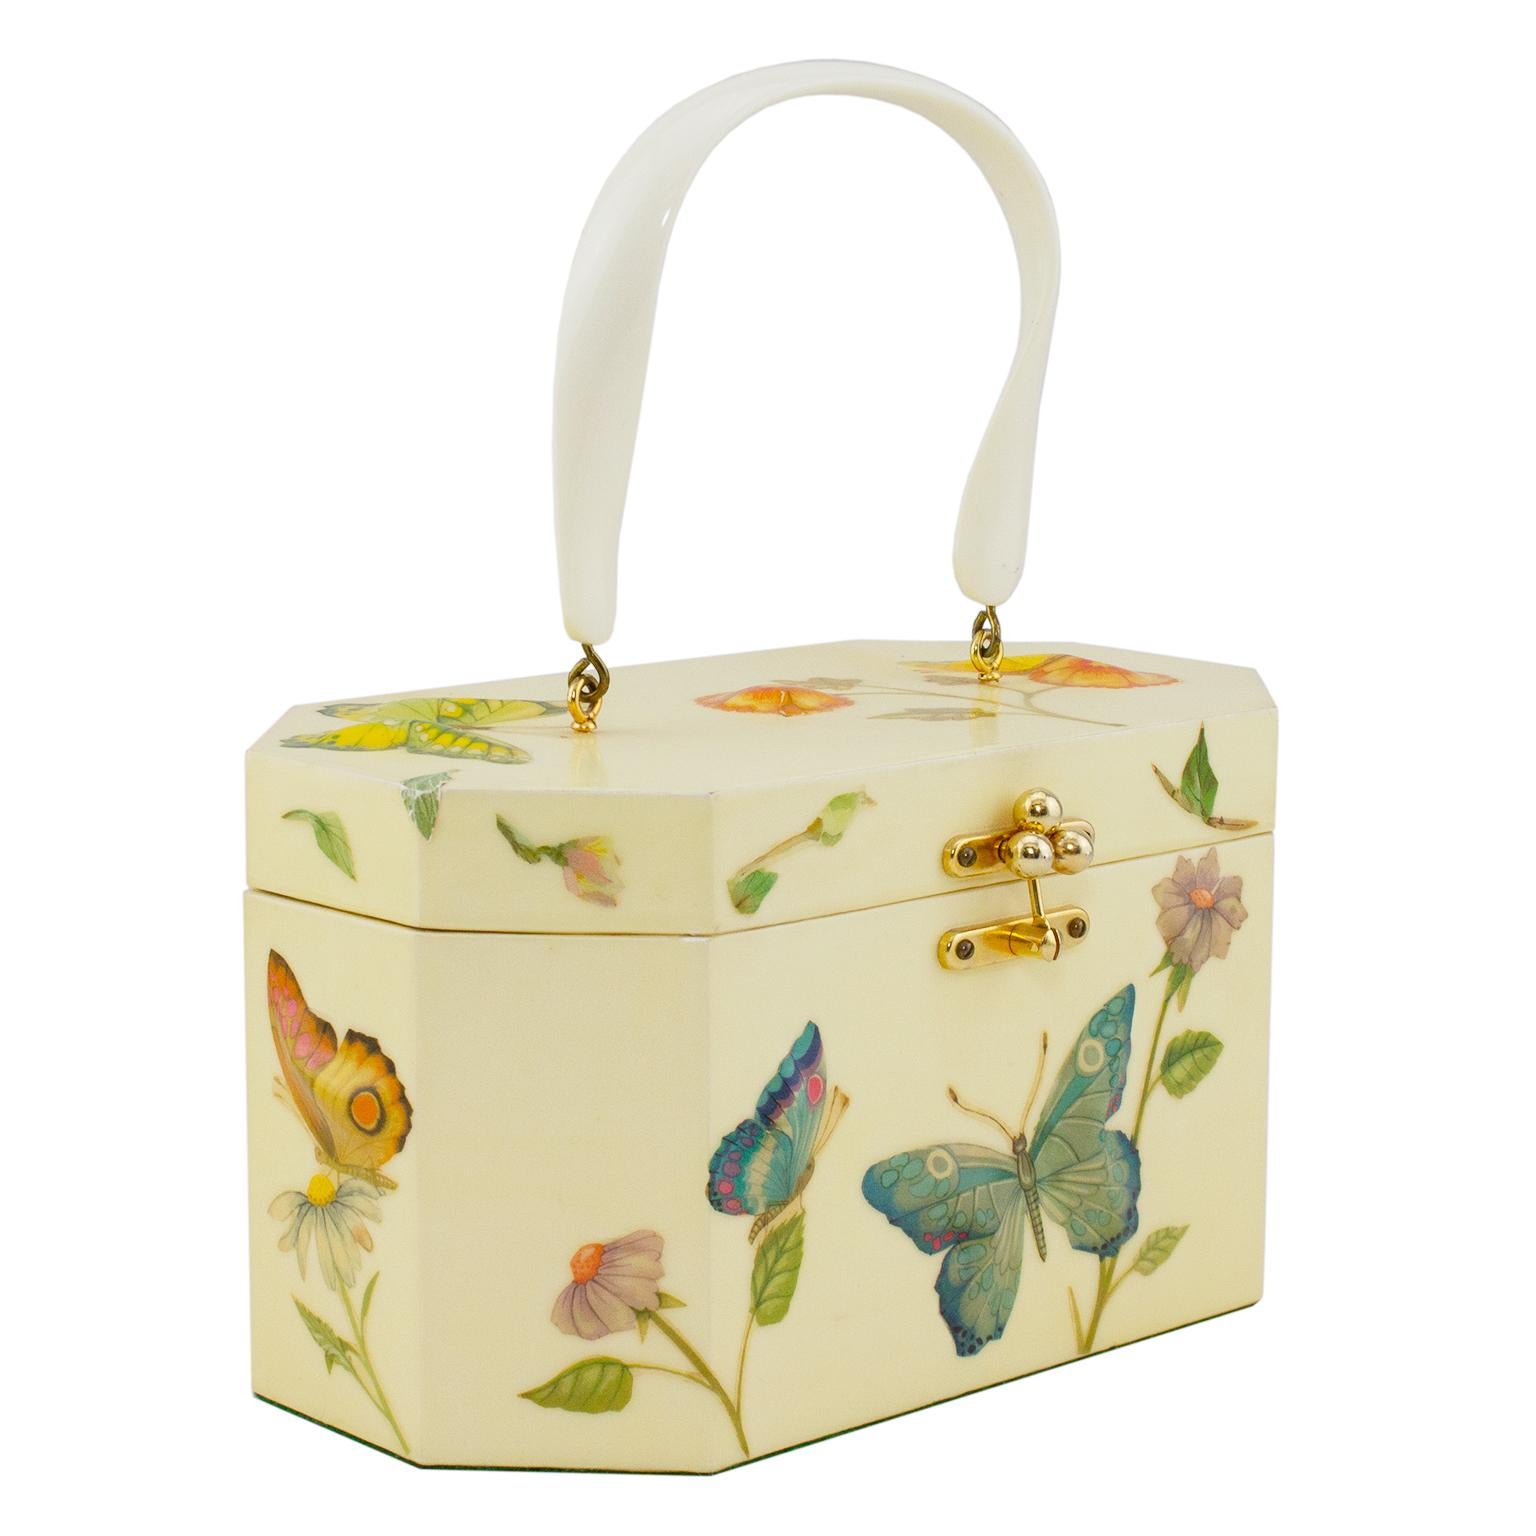 The most lovely little 1950s handbag by Annie Laurie Palm Beach. Hard beige plastic with beautiful, 3D flowers and butterflies done in a form of decoupage. Curved white plastic top handle and gold tone metal clasp and hardware. Periwinkle blue